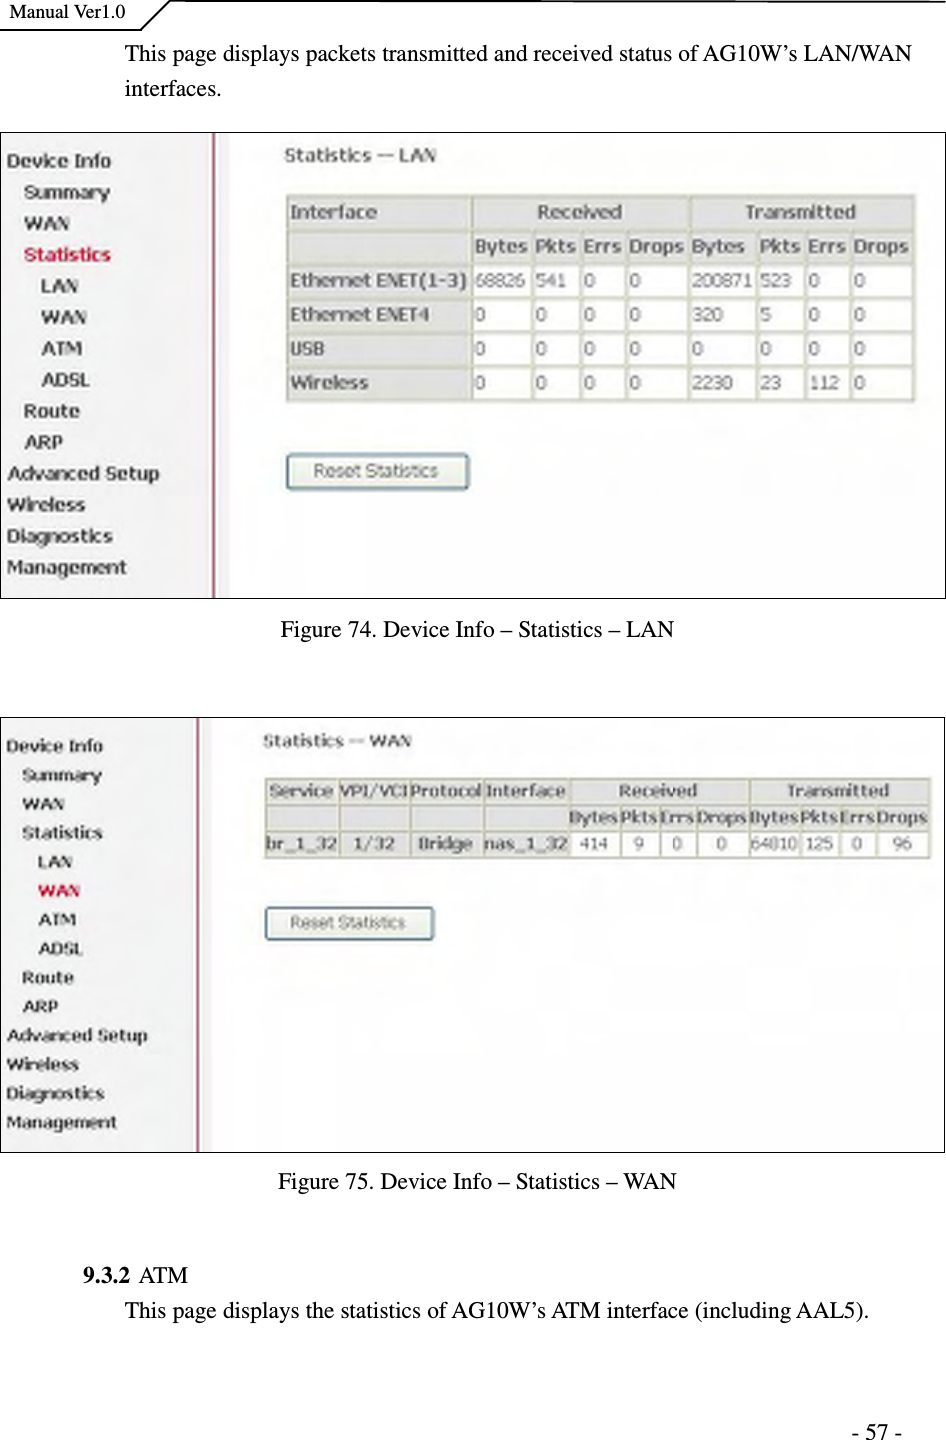    Manual Ver1.0                                                                      - 57 - This page displays packets transmitted and received status of AG10W’s LAN/WAN interfaces.   Figure 74. Device Info – Statistics – LAN      Figure 75. Device Info – Statistics – WAN  9.3.2 ATM This page displays the statistics of AG10W’s ATM interface (including AAL5).  